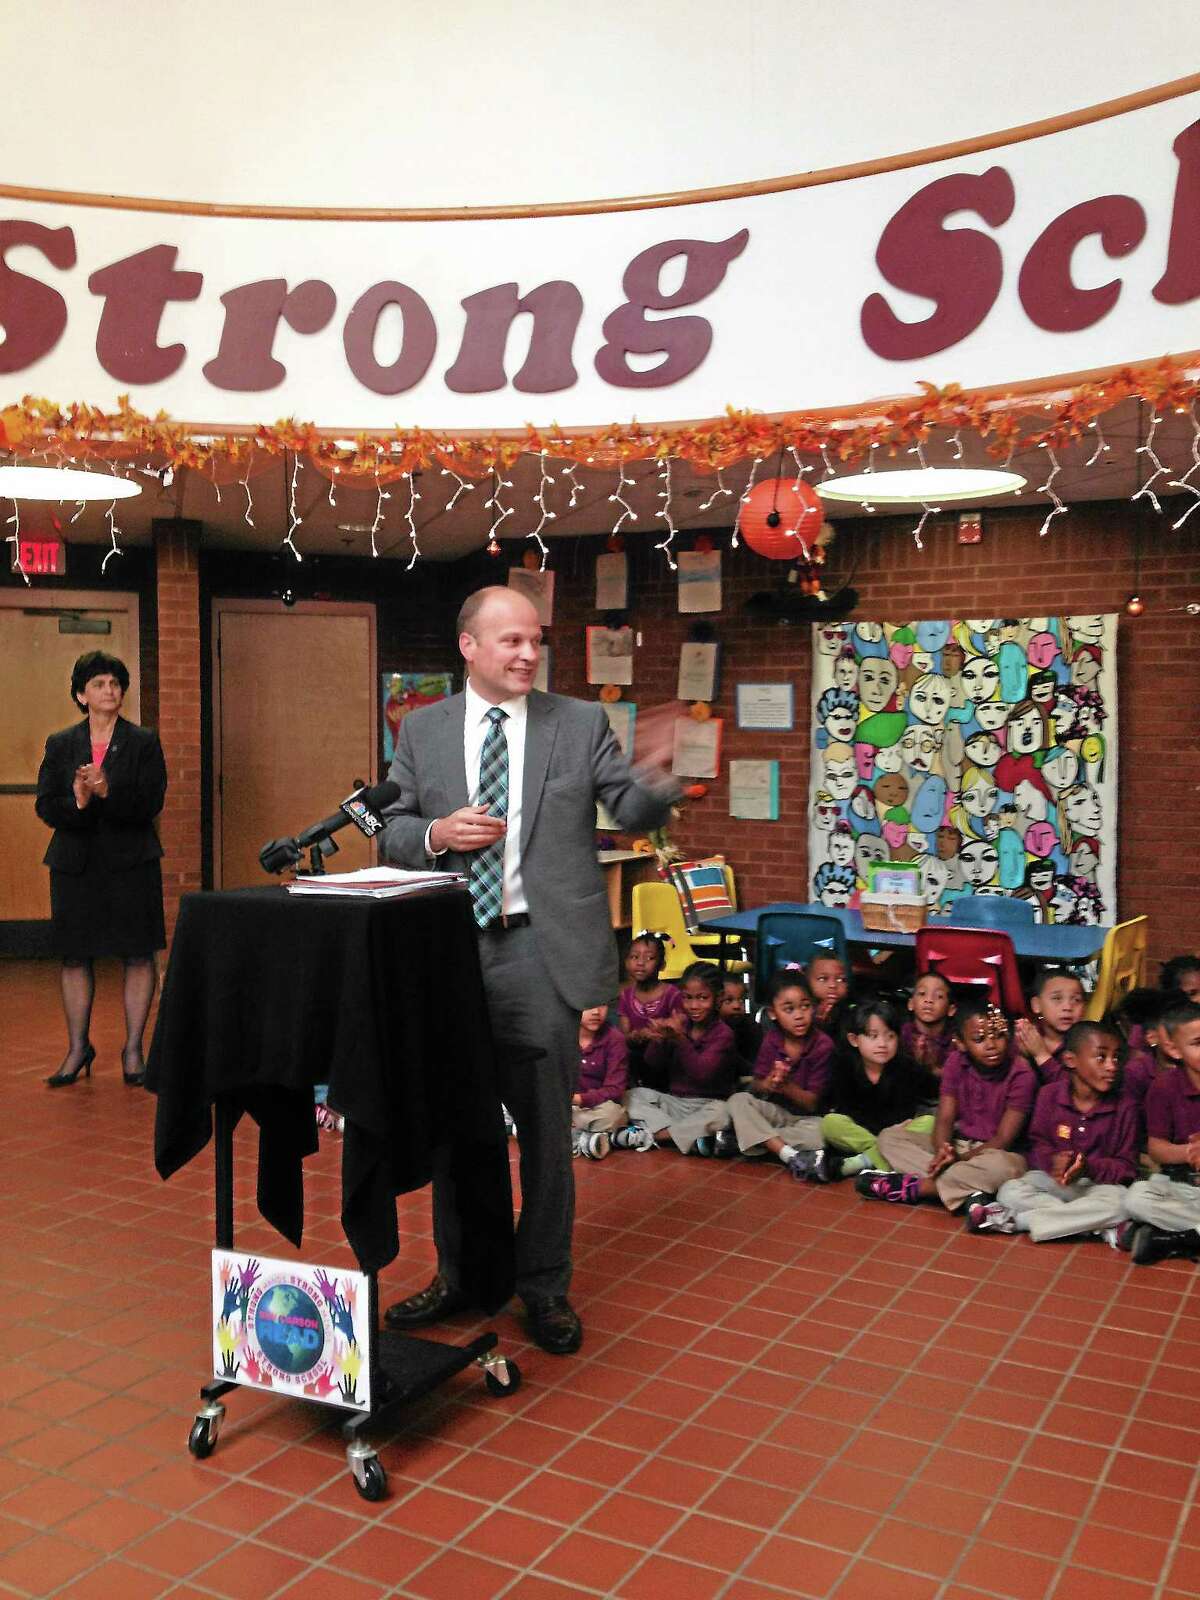 Superintendent of Schools Garth Harries speaks at a September event at New Haven's Strong School